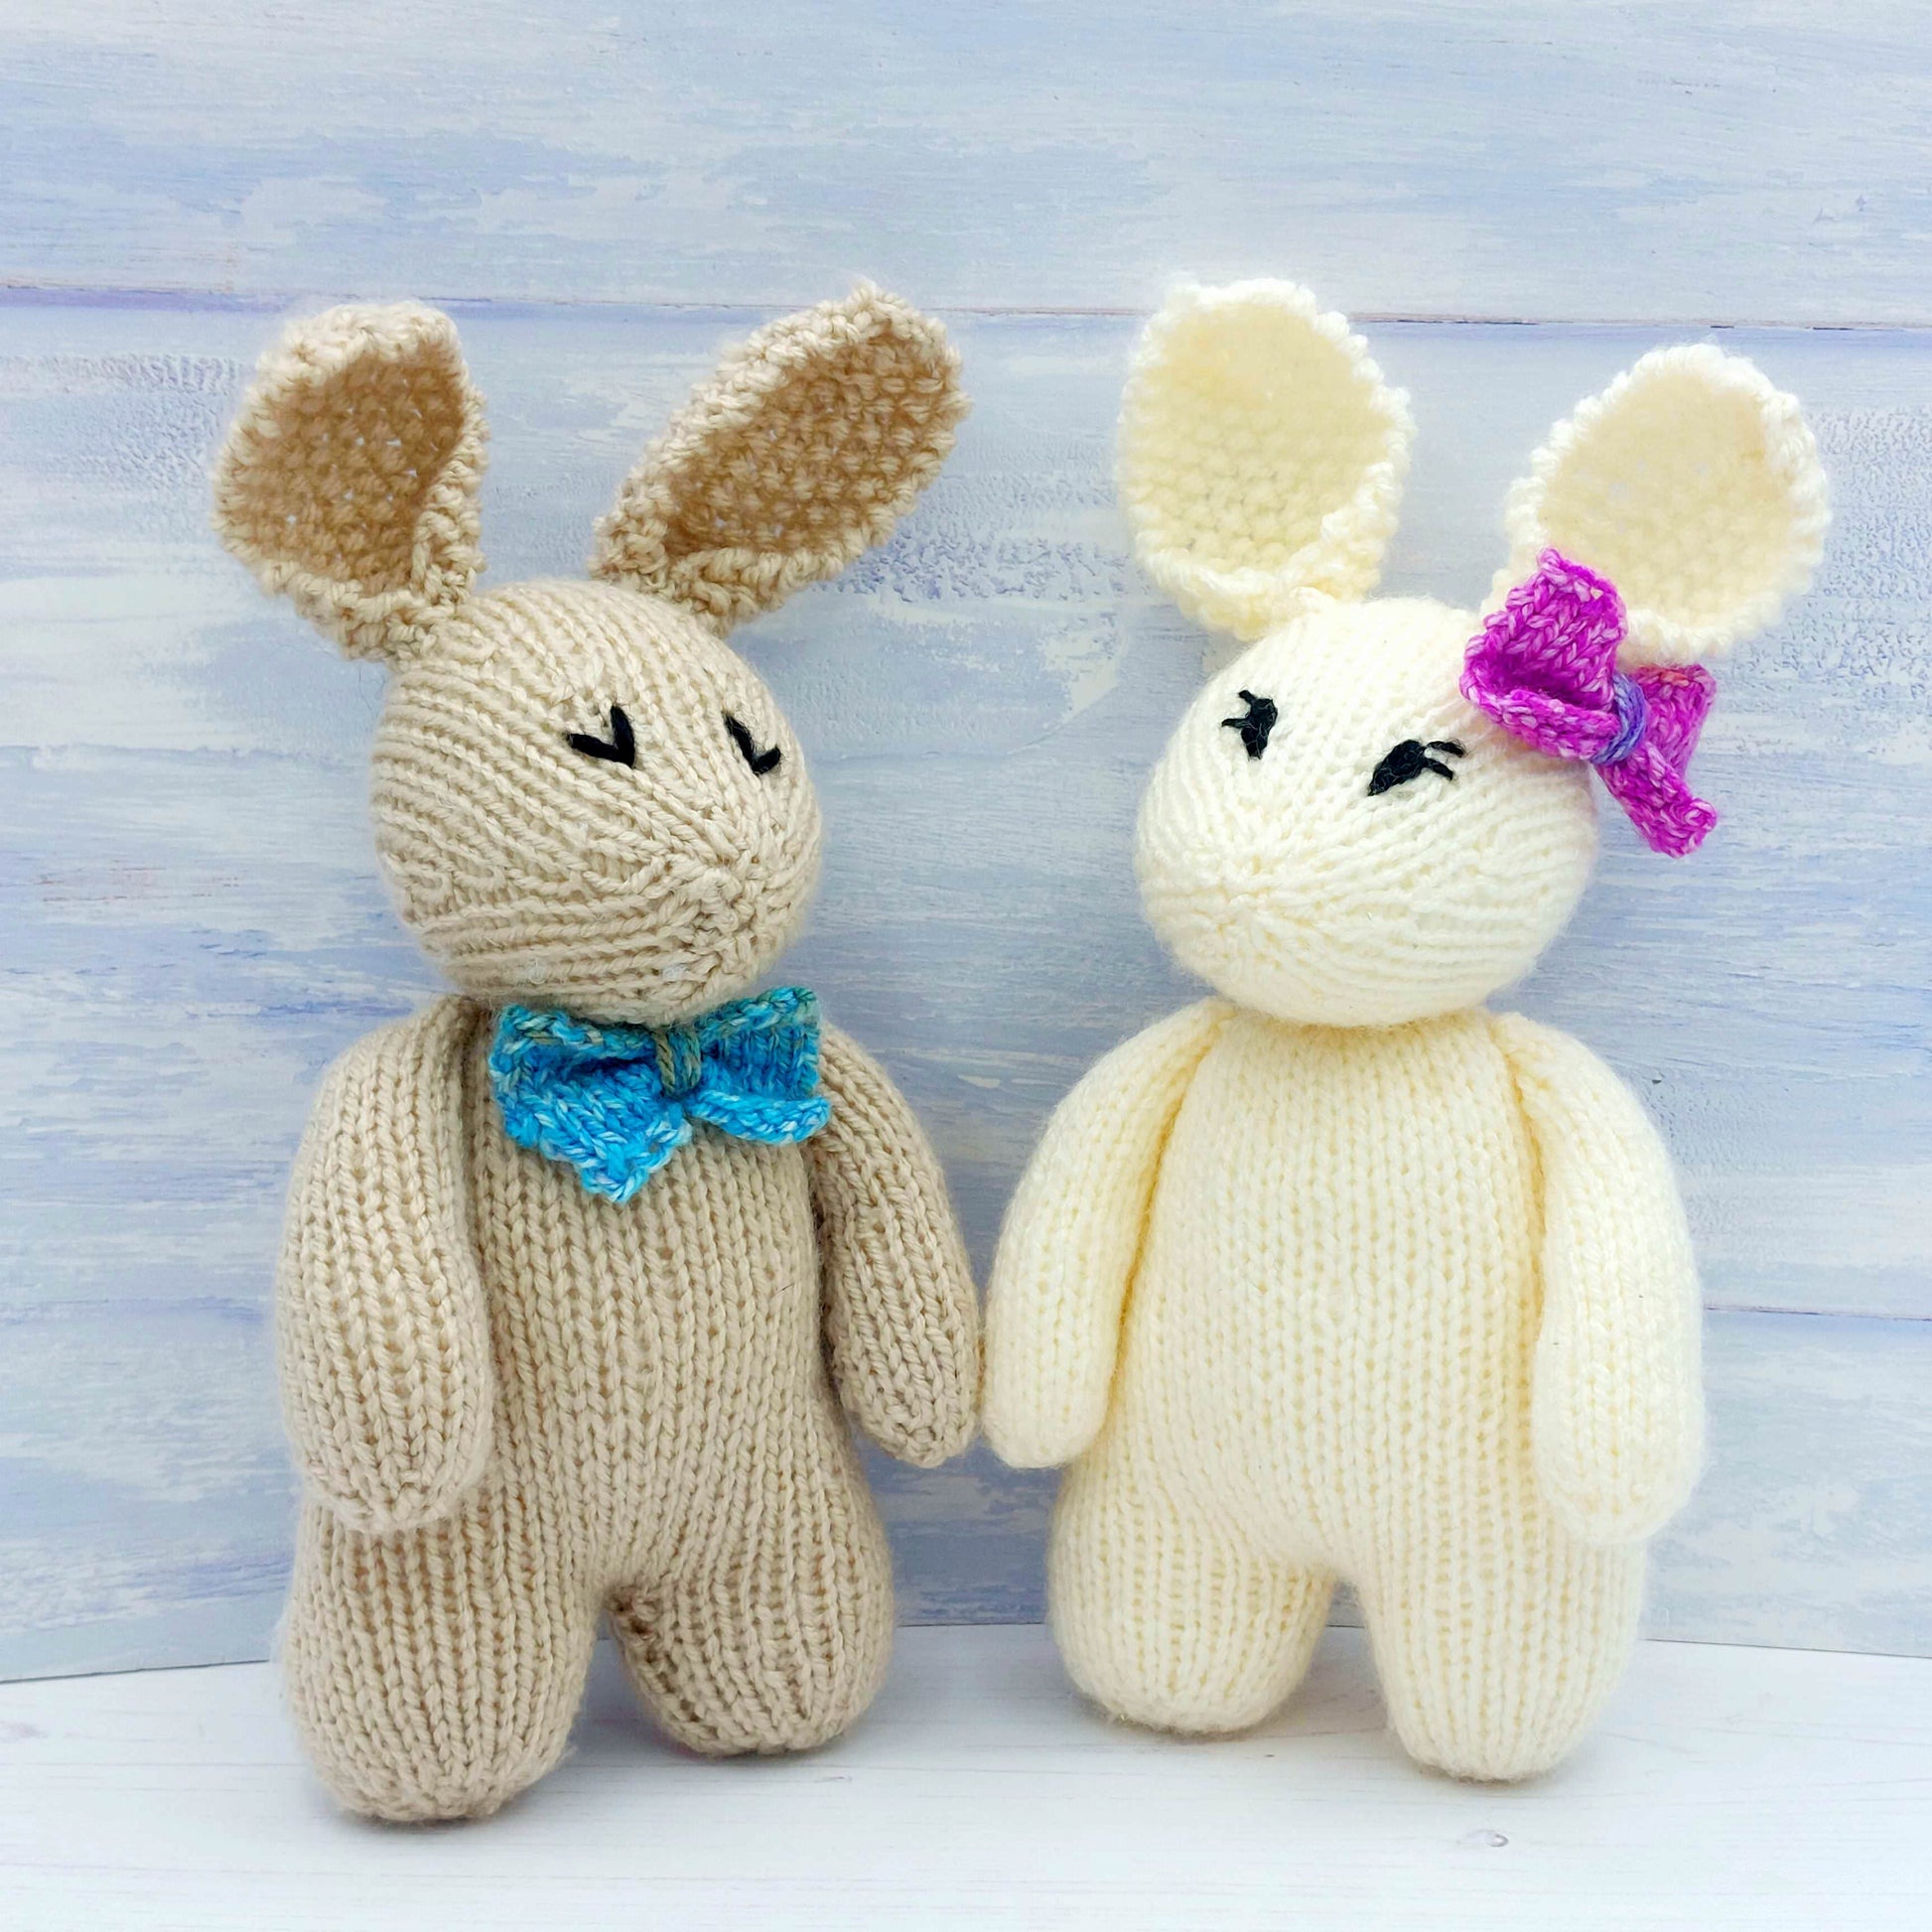 Finished Arthur & Betsy Knitted Bunnies